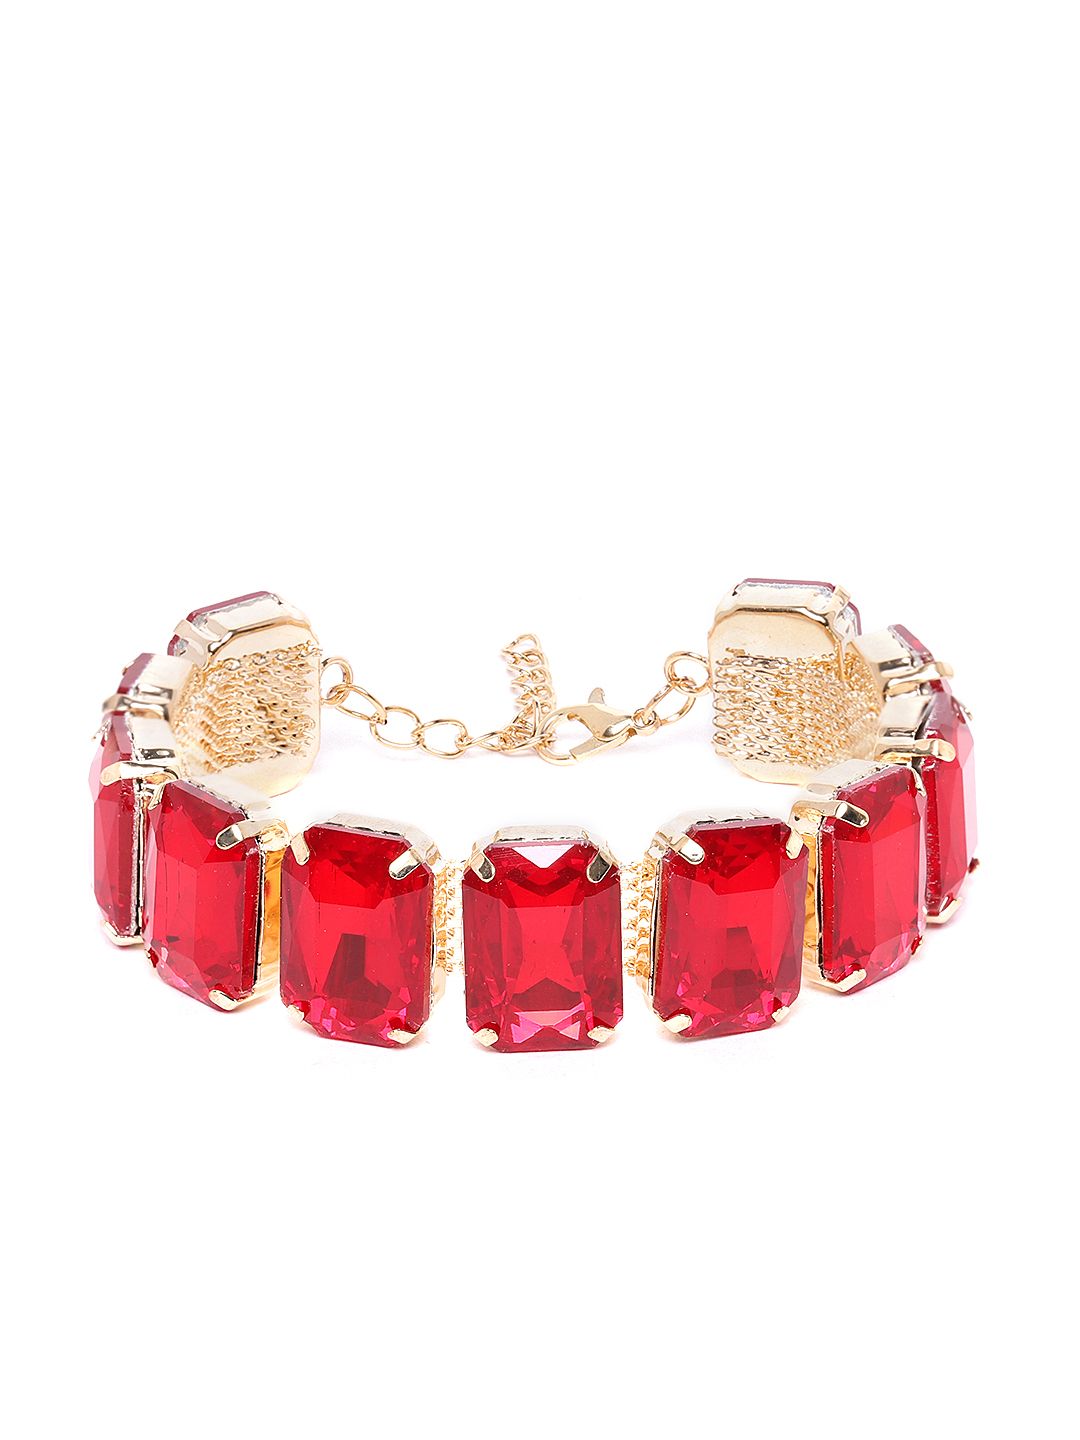 YouBella Red Gold-Plated Stone Studded Bracelet Price in India